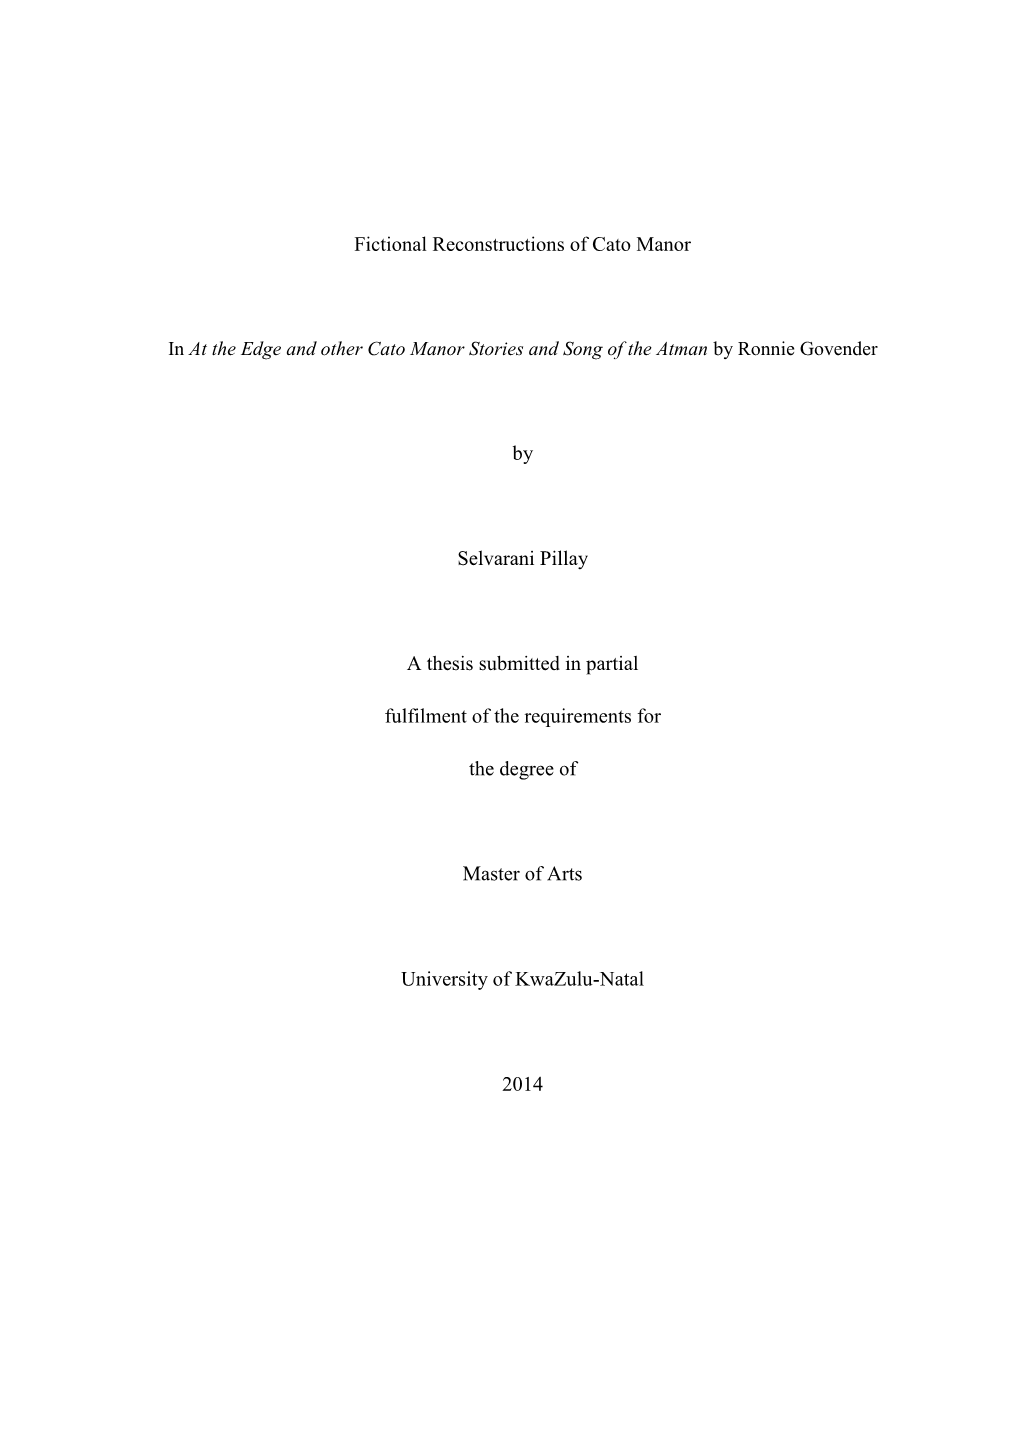 Fictional Reconstructions of Cato Manor by Selvarani Pillay a Thesis Submitted in Partial Fulfilment of the Requirements For